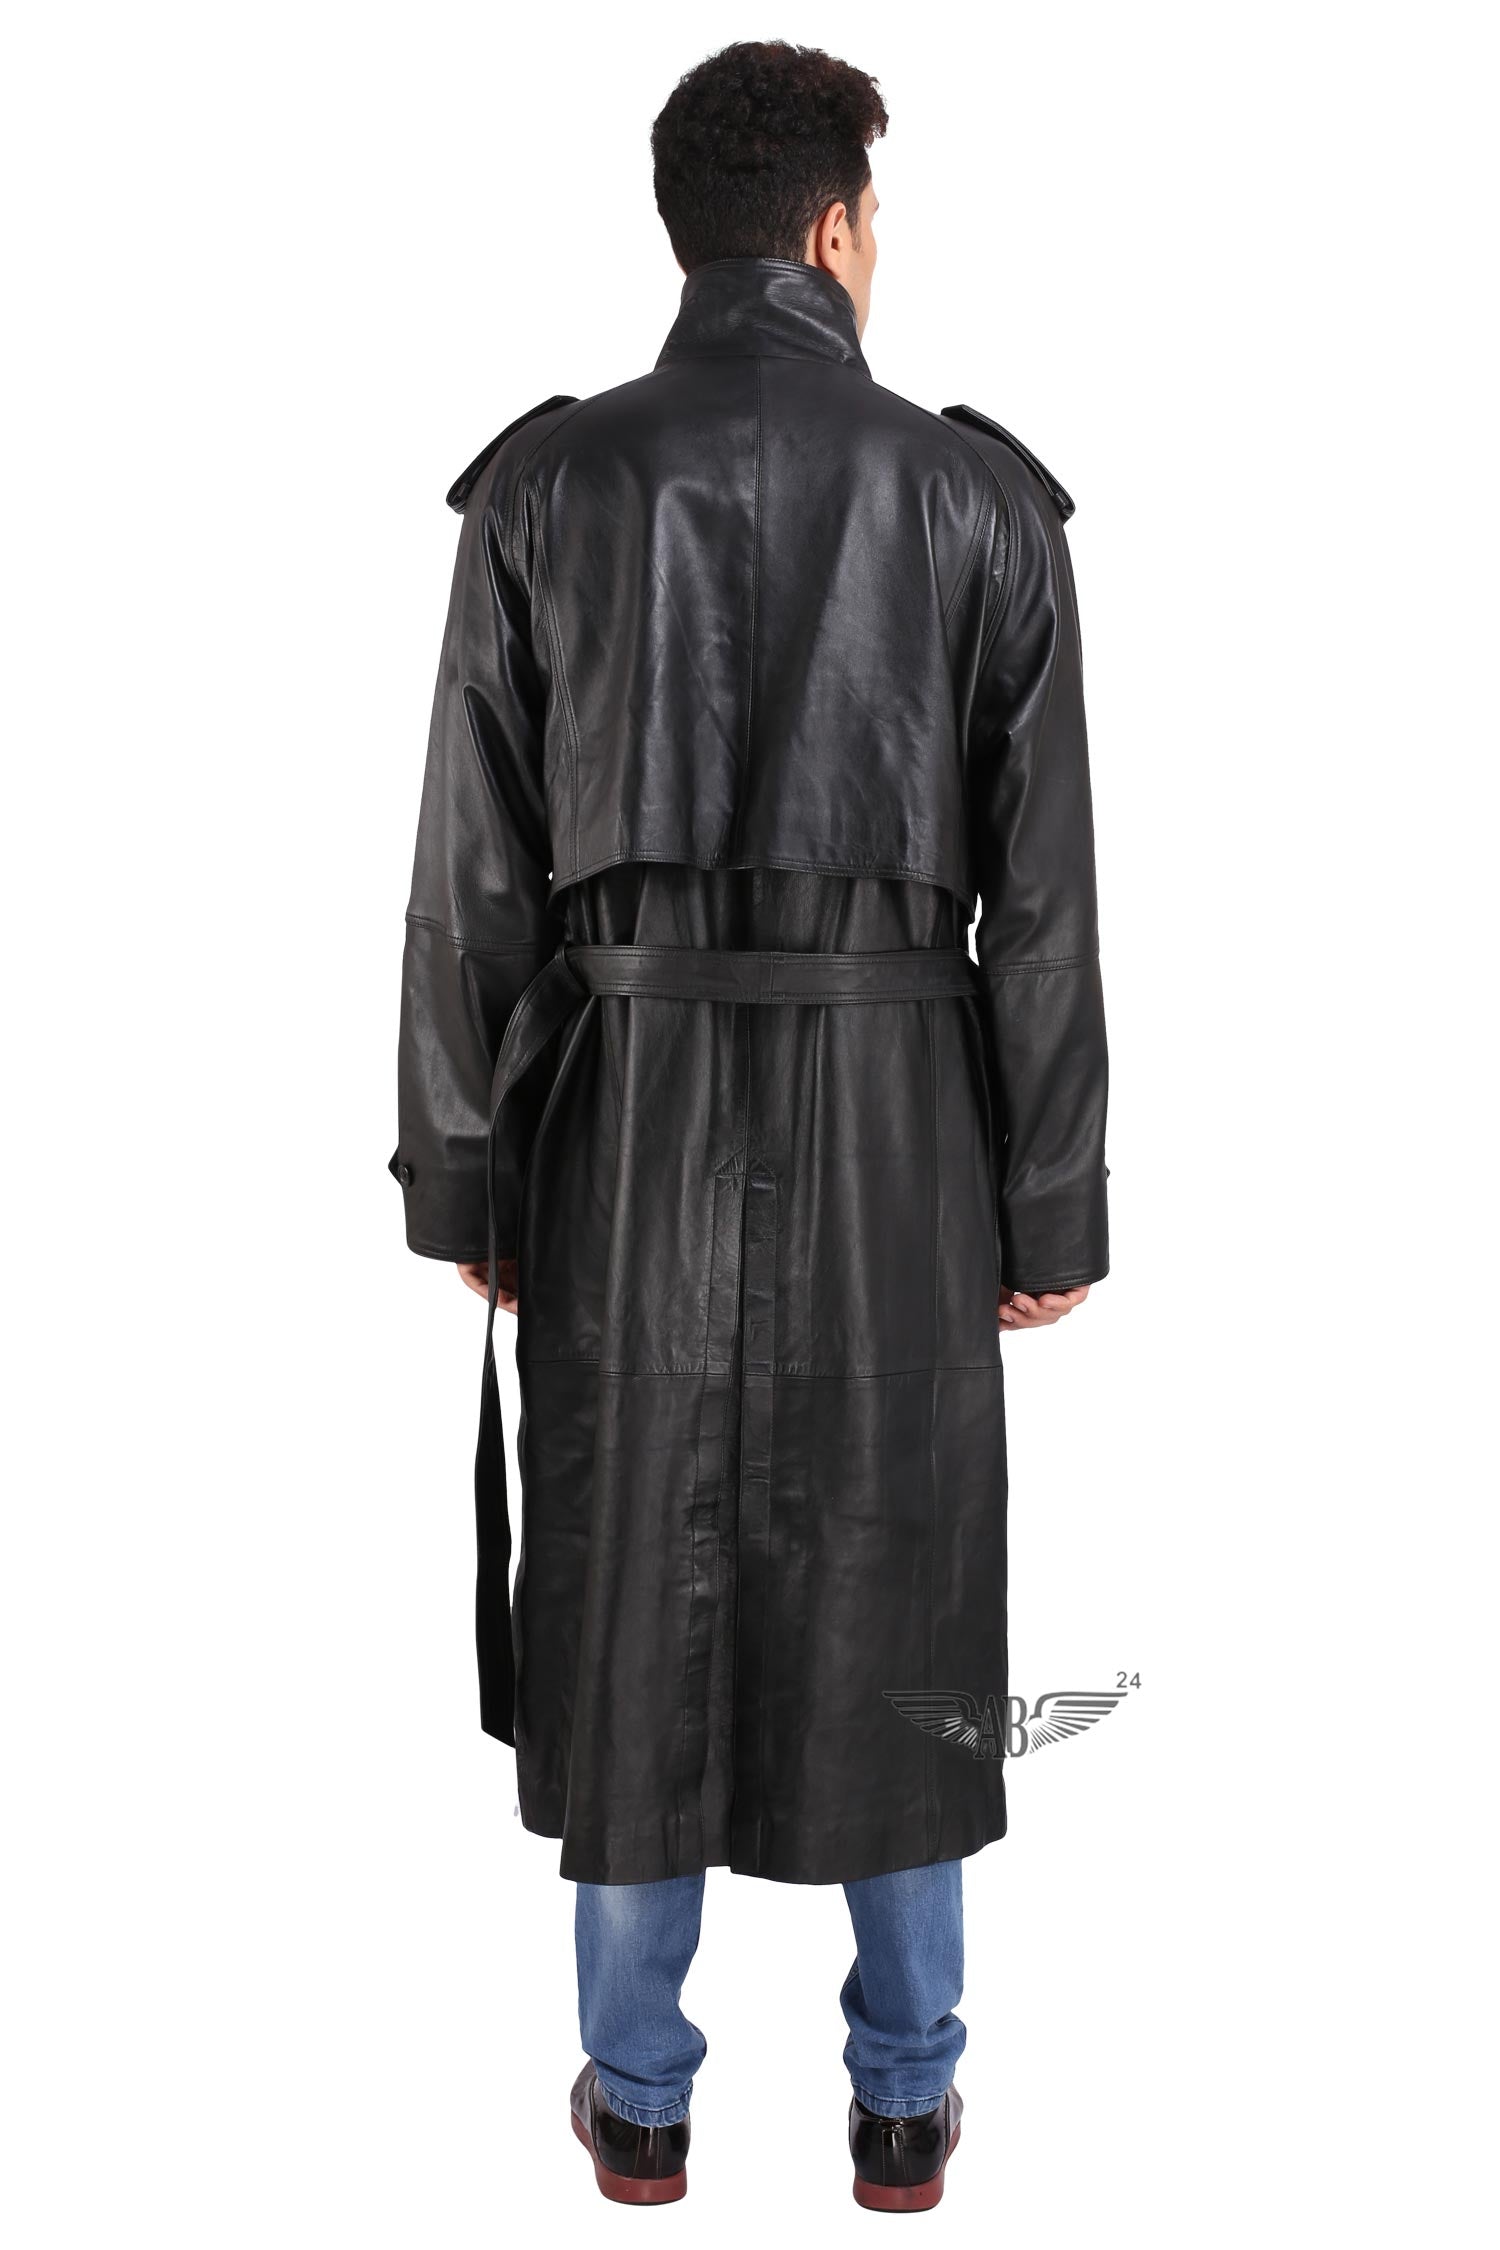 Back image of black TRENCH COAT. Turtle neck is depicted.